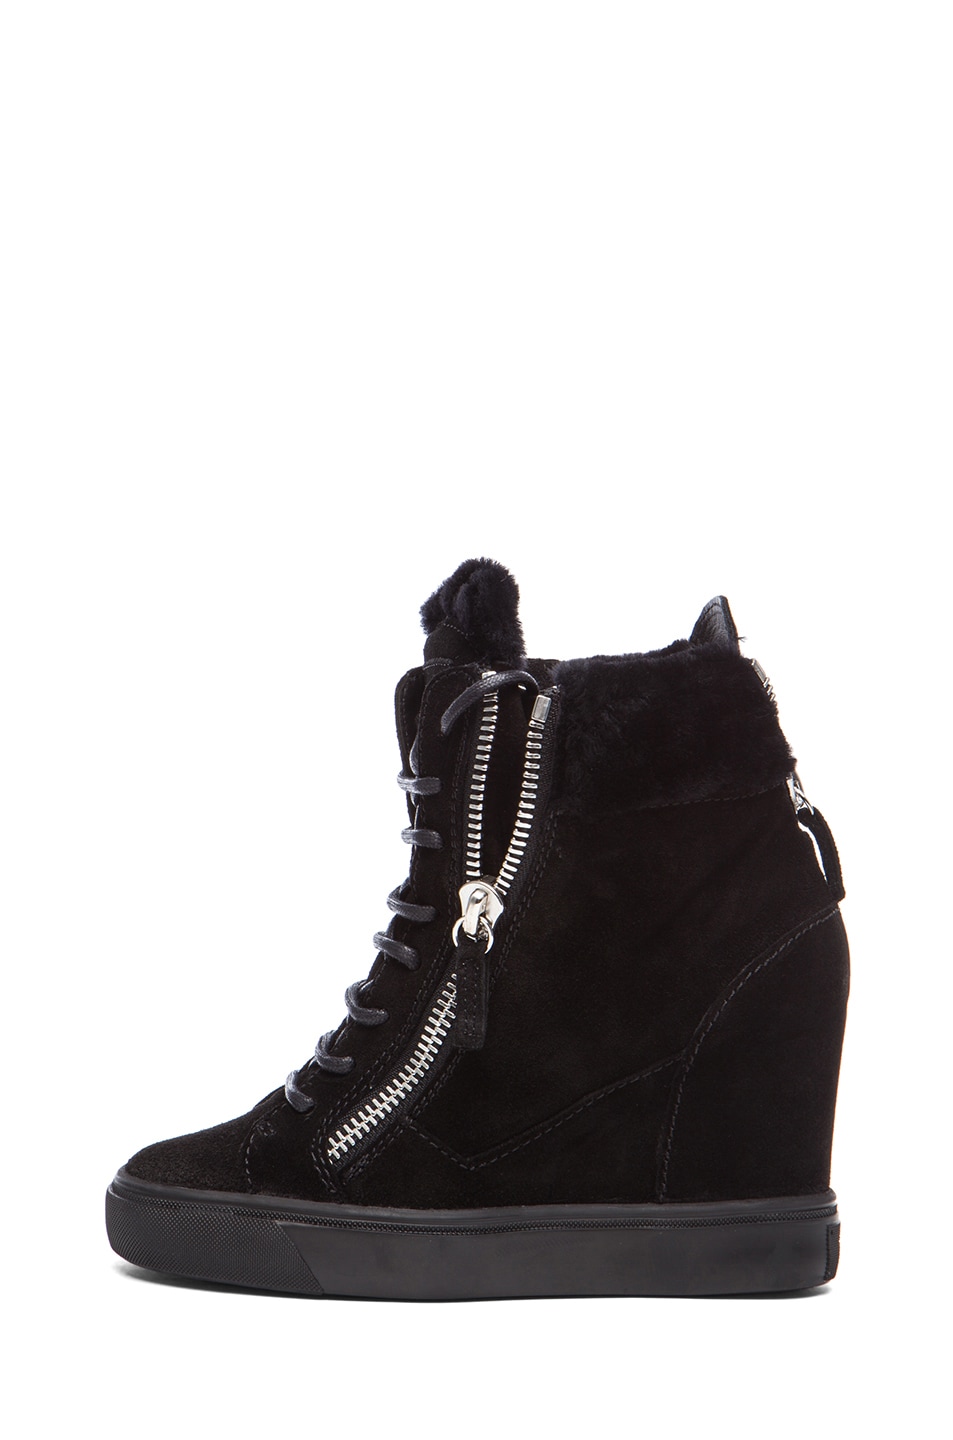 Image 1 of Giuseppe Zanotti Suede High Top Shearling Wedge Sneakers in Black